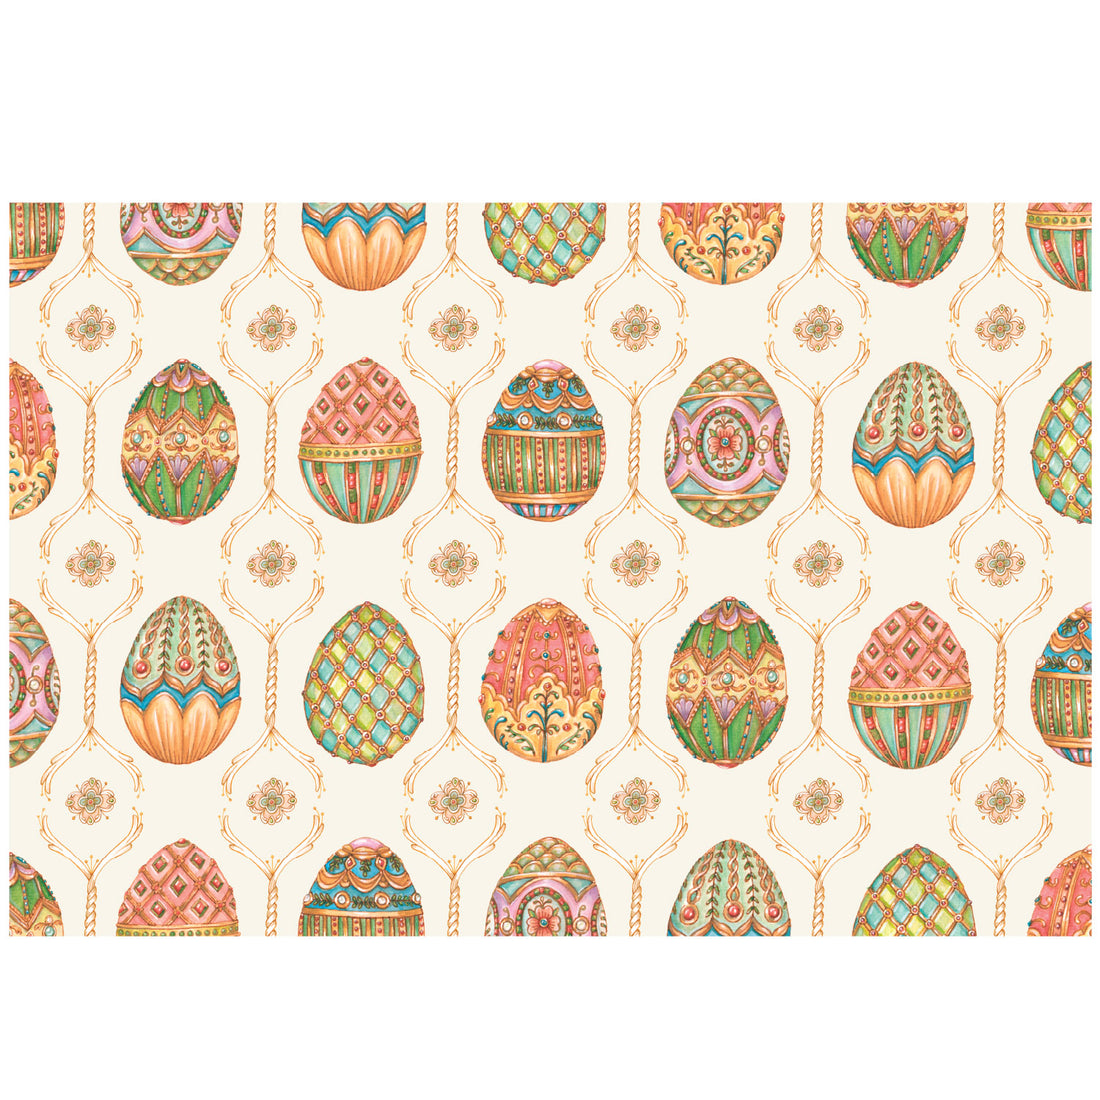 An evenly-spaced illustrated pattern of elaborate Fabergé eggs between floral accents, in pink, green, teal and orange on a white background.